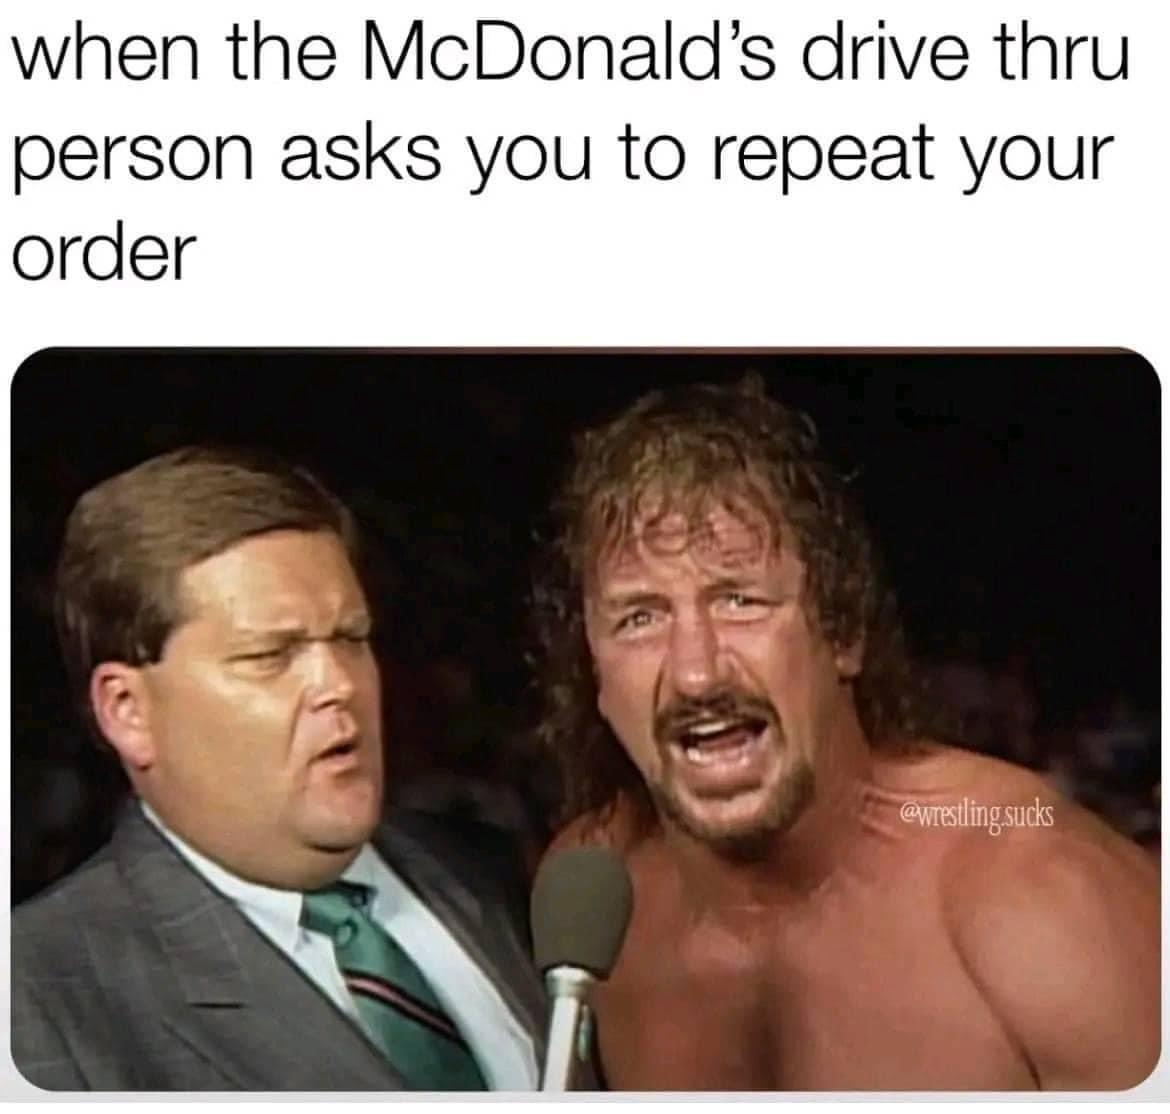 funny memes - dank memes - photo caption - when the McDonald's drive thru person asks you to repeat your order .sucks